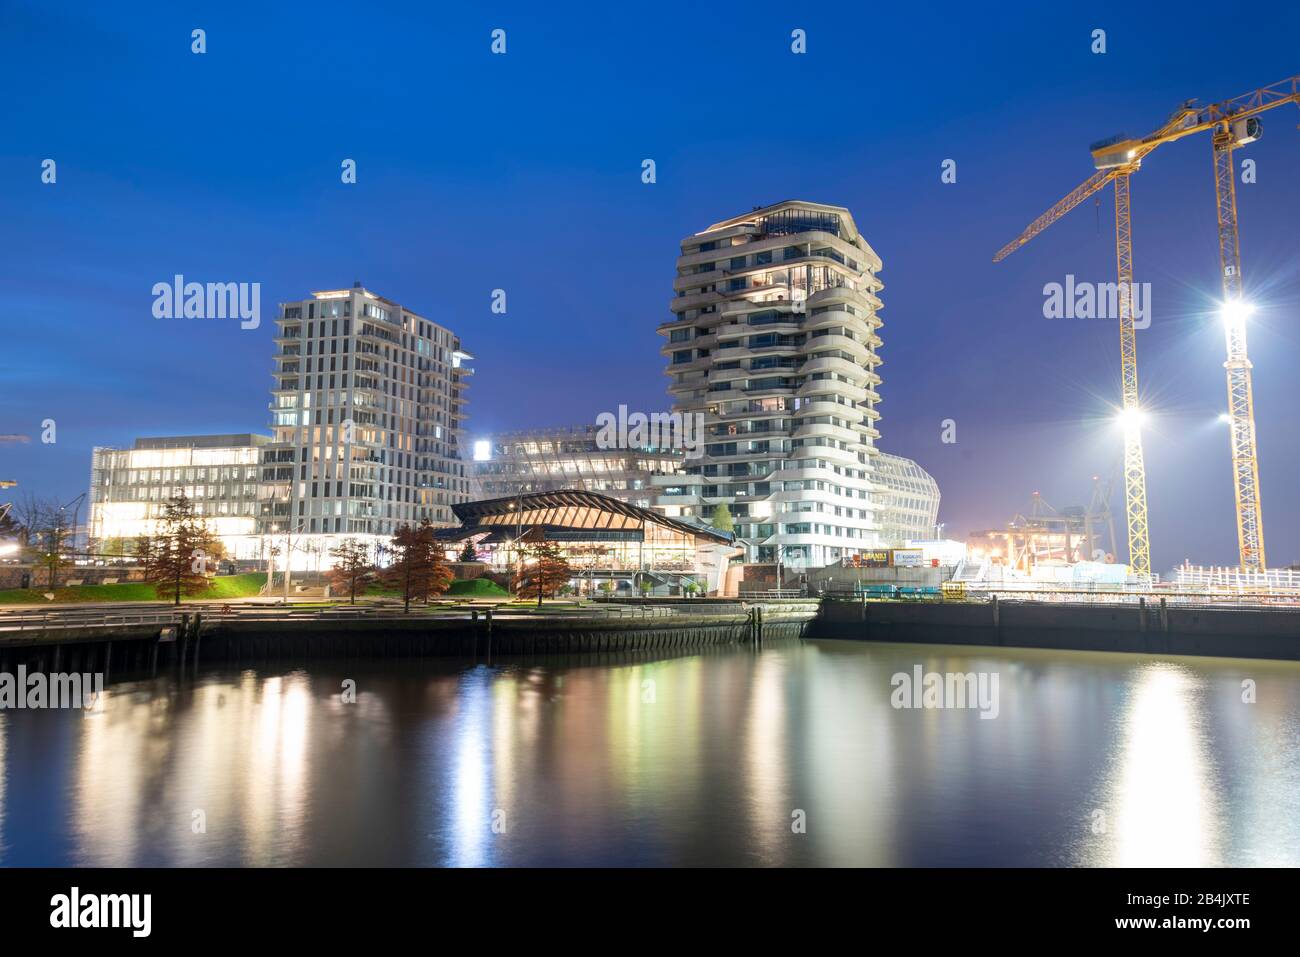 Germany, Hamburg, view of the Marco Polo Tower, major construction site, skyscrapers, Hafencity, Port of Hamburg. Stock Photo